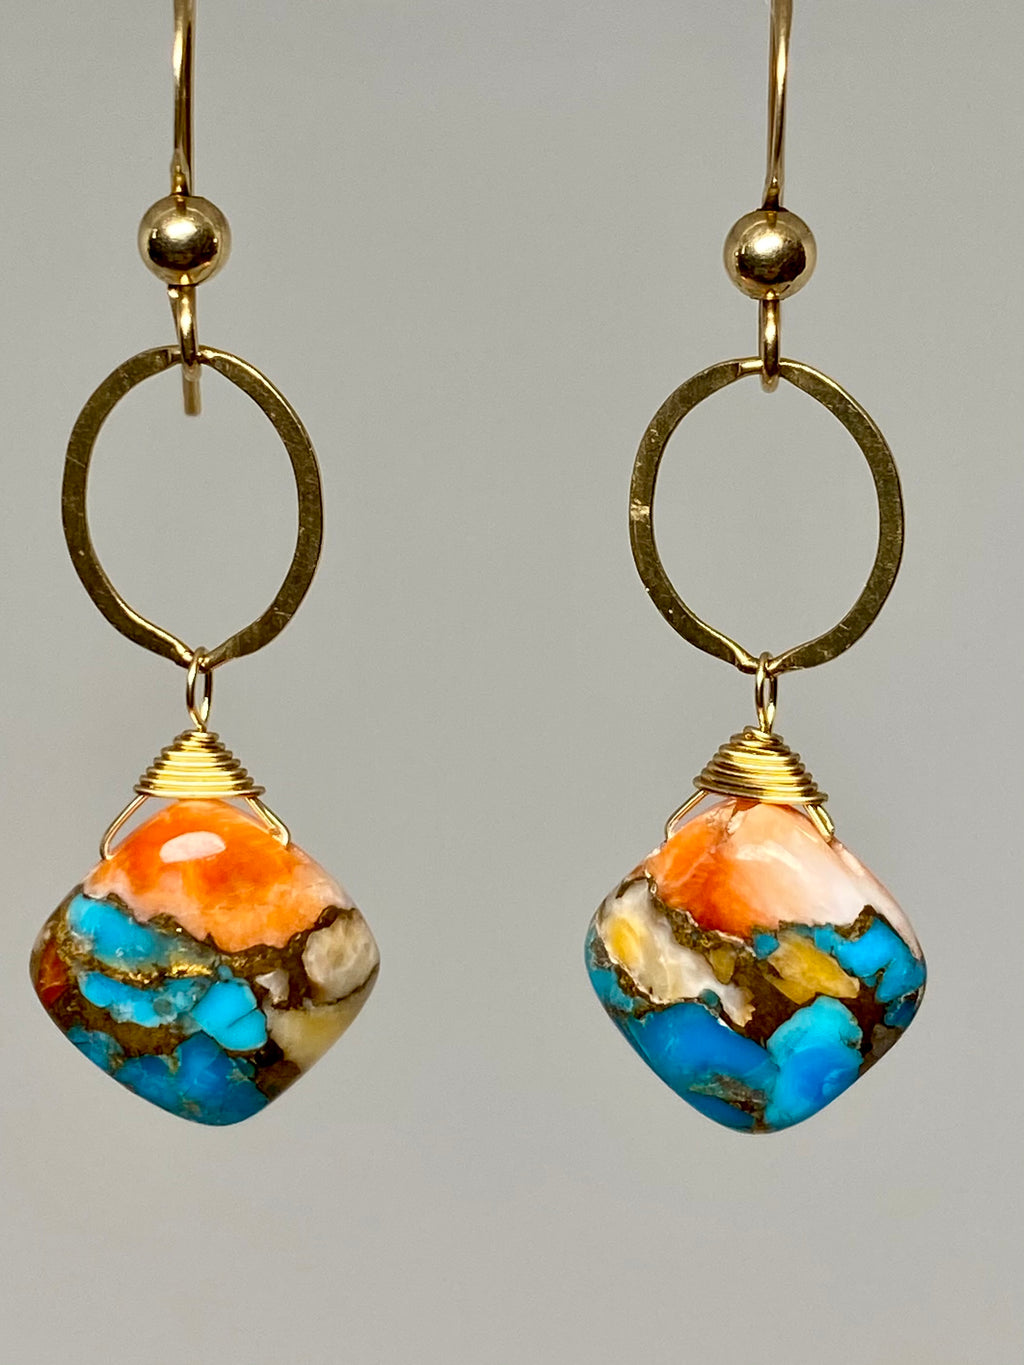 Pair of Turquoise Oyster Shell Earrings